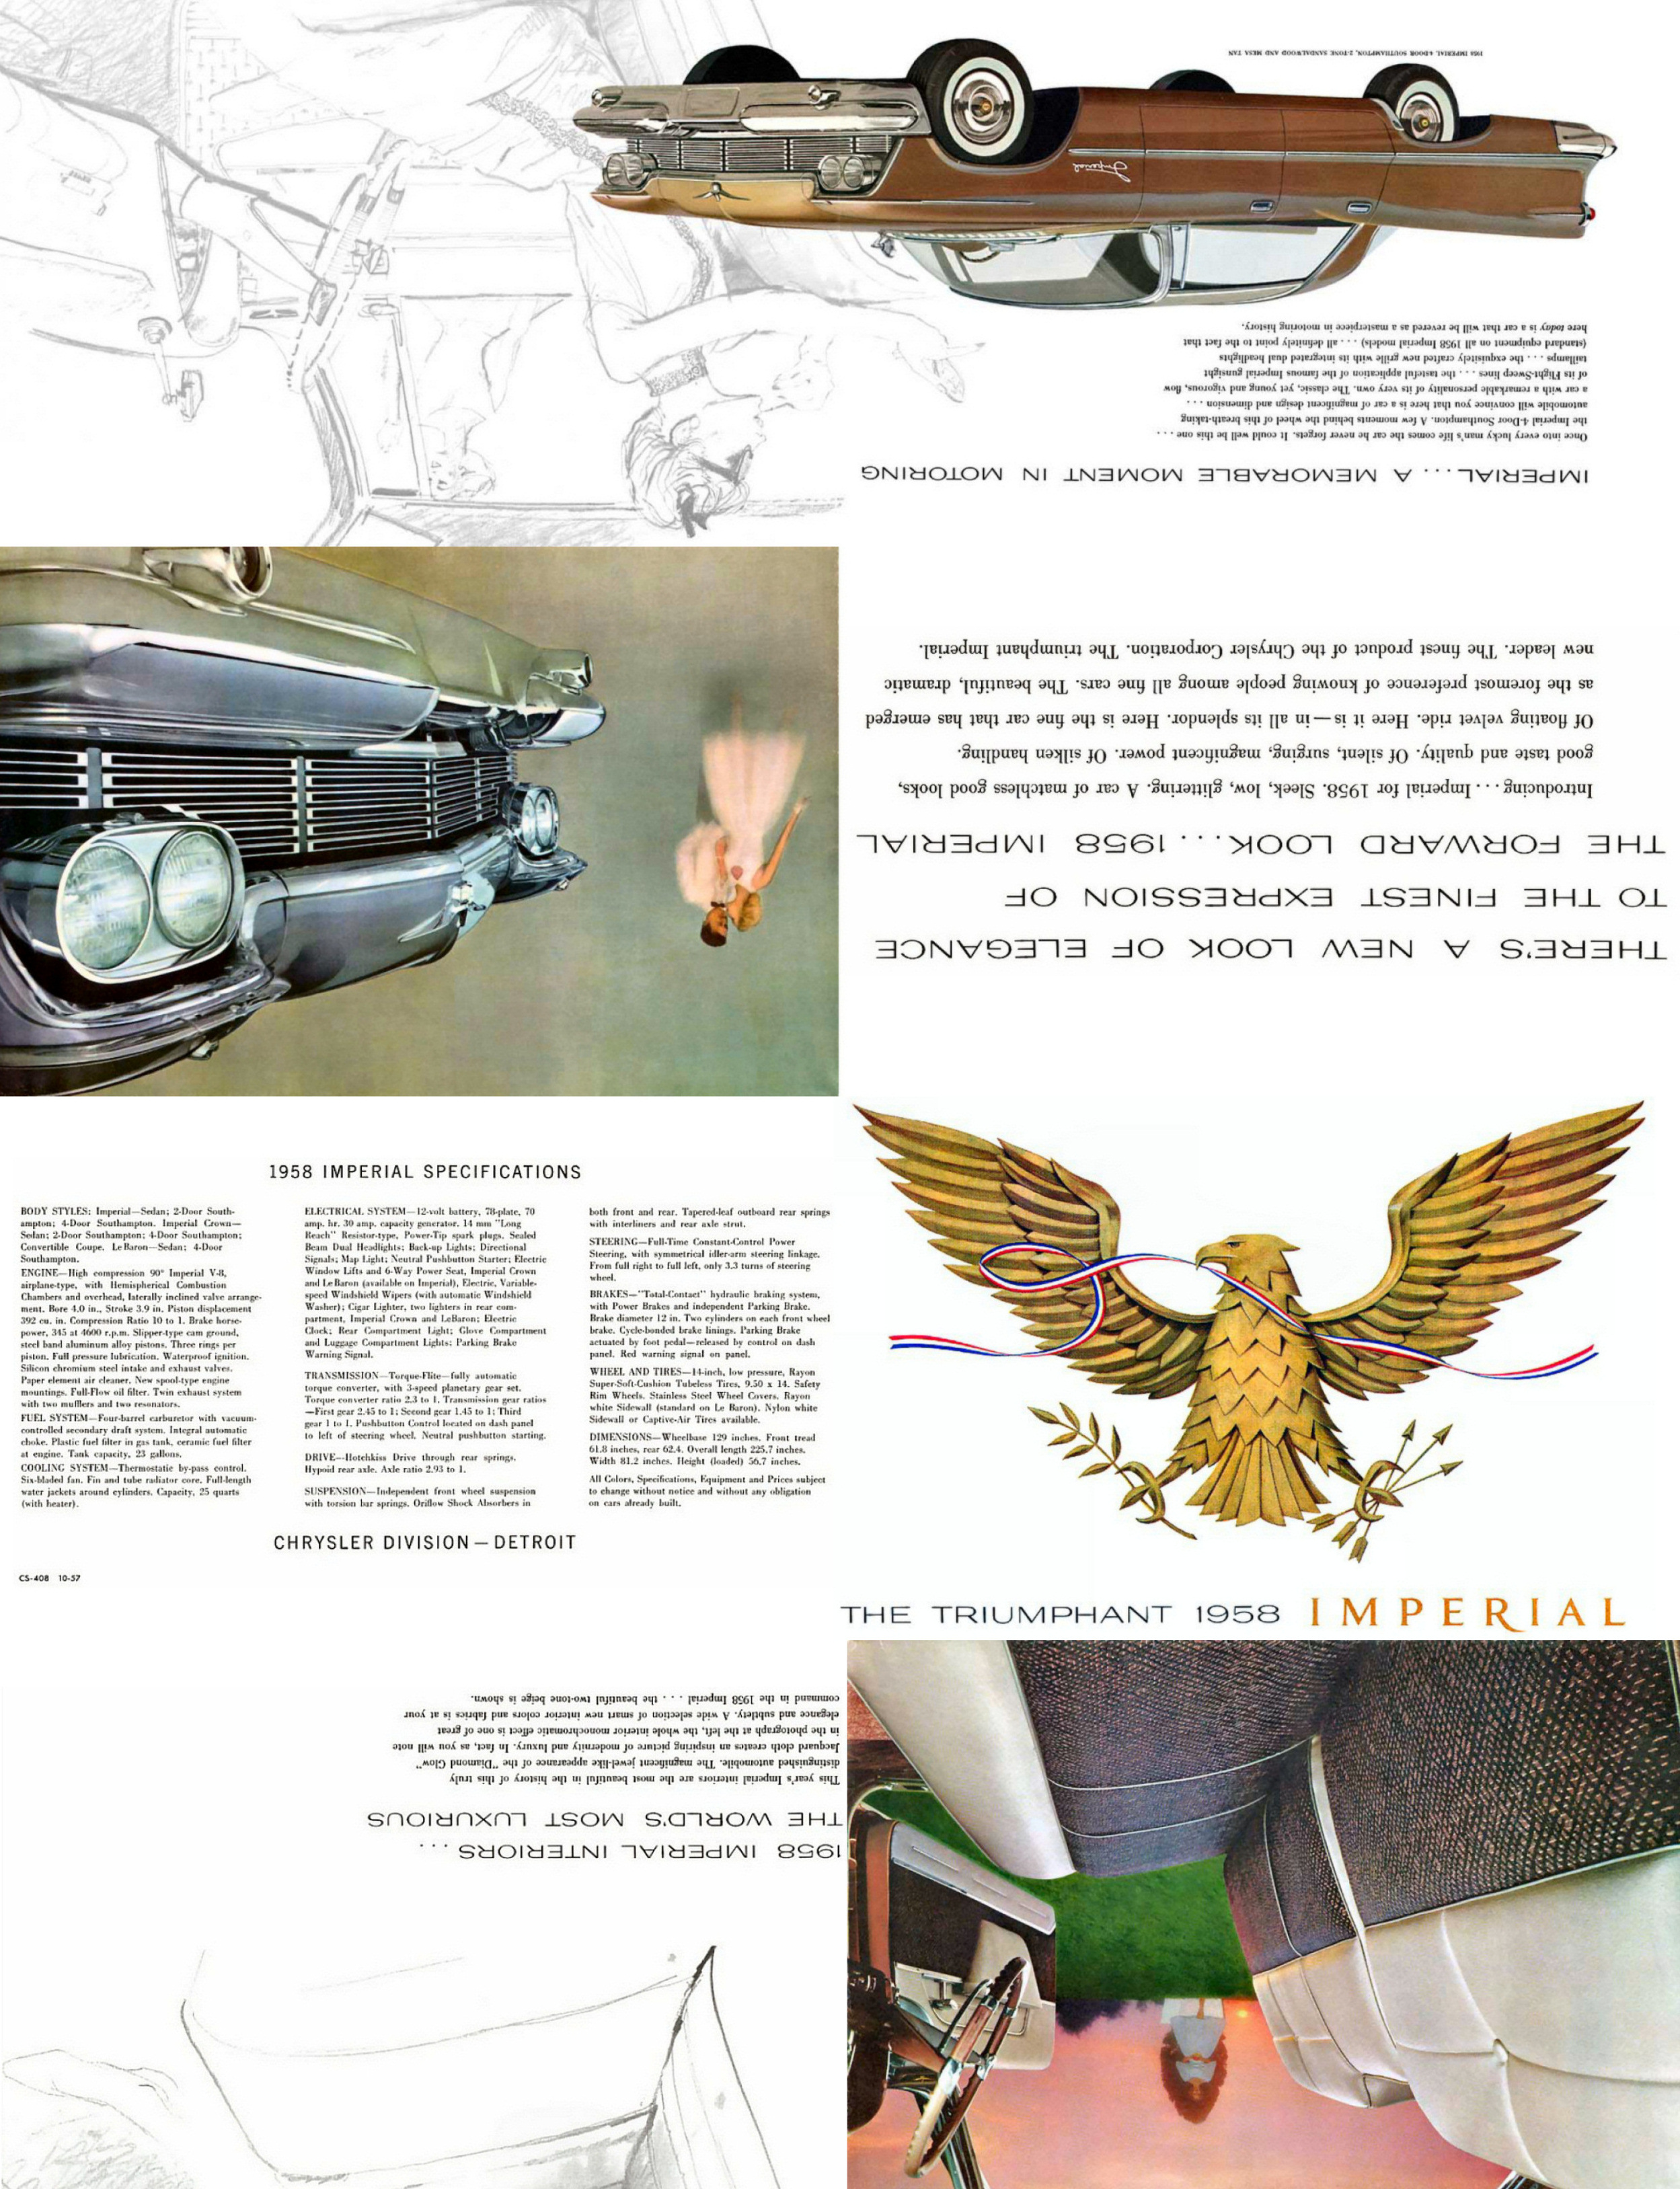 1958 Imperial Foldout-Side A1